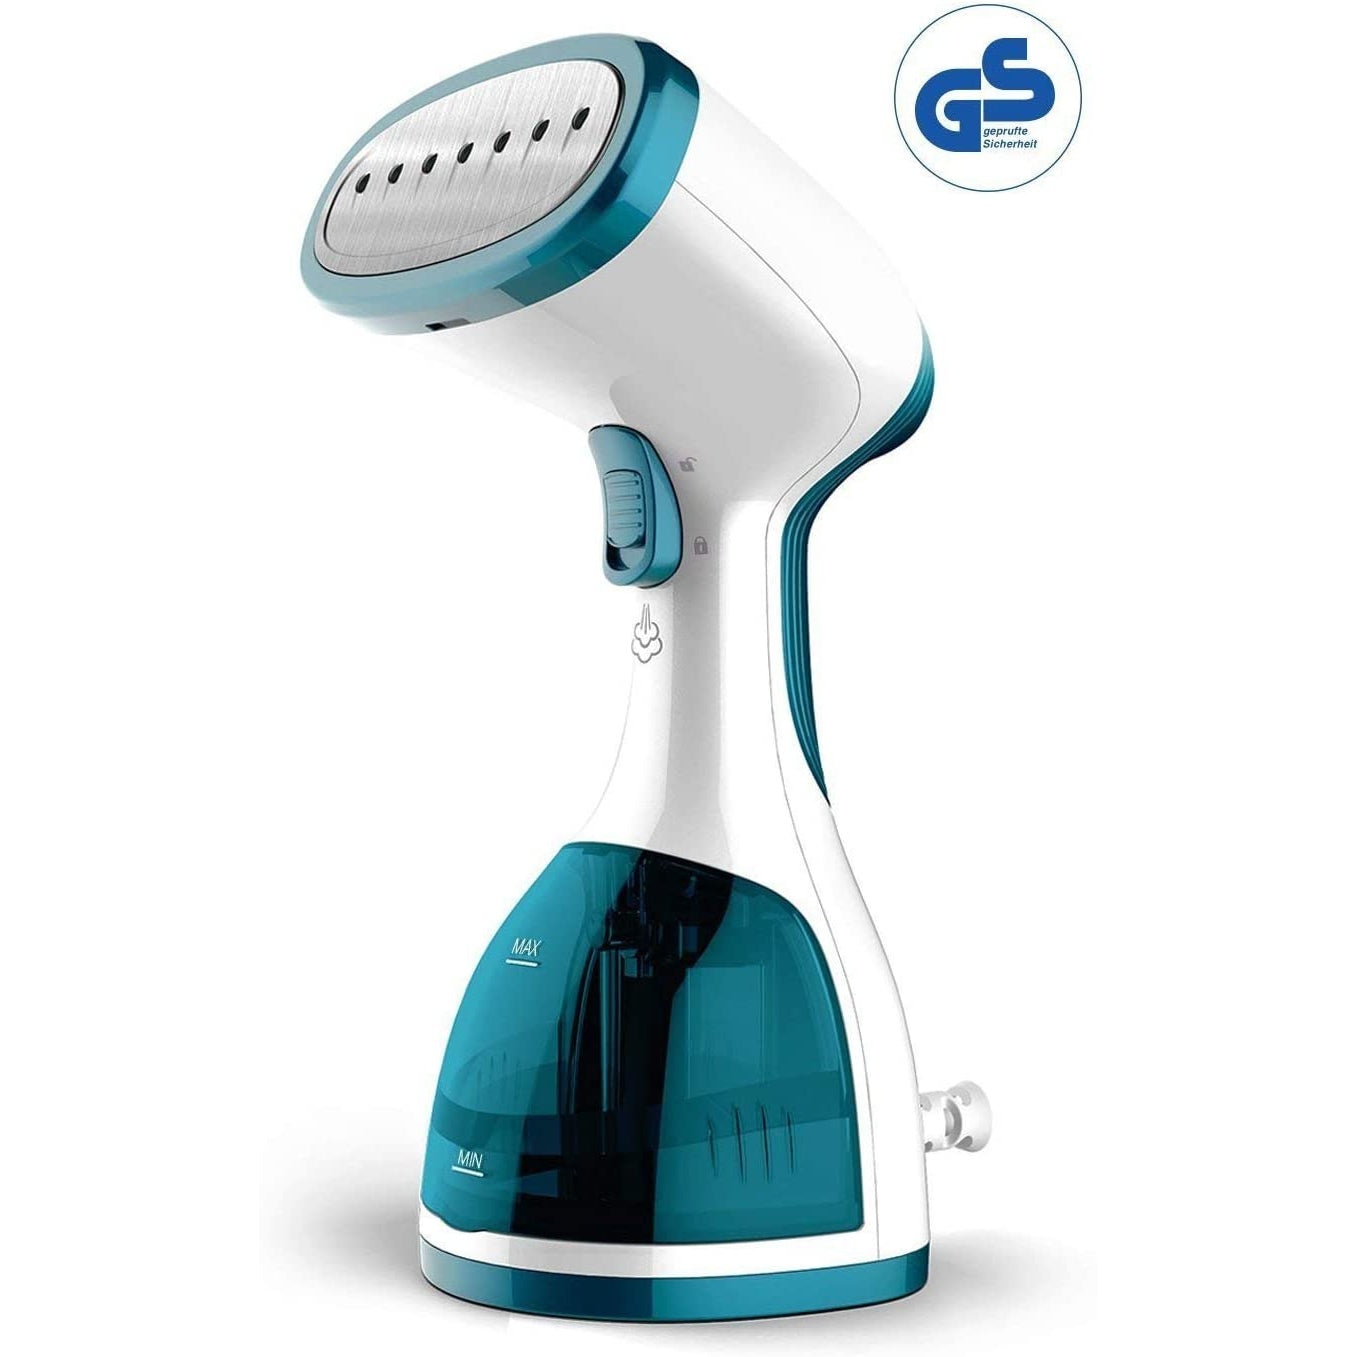 homeasy Clothes Steamer 5 in 1 Handheld Steam Iron - Green